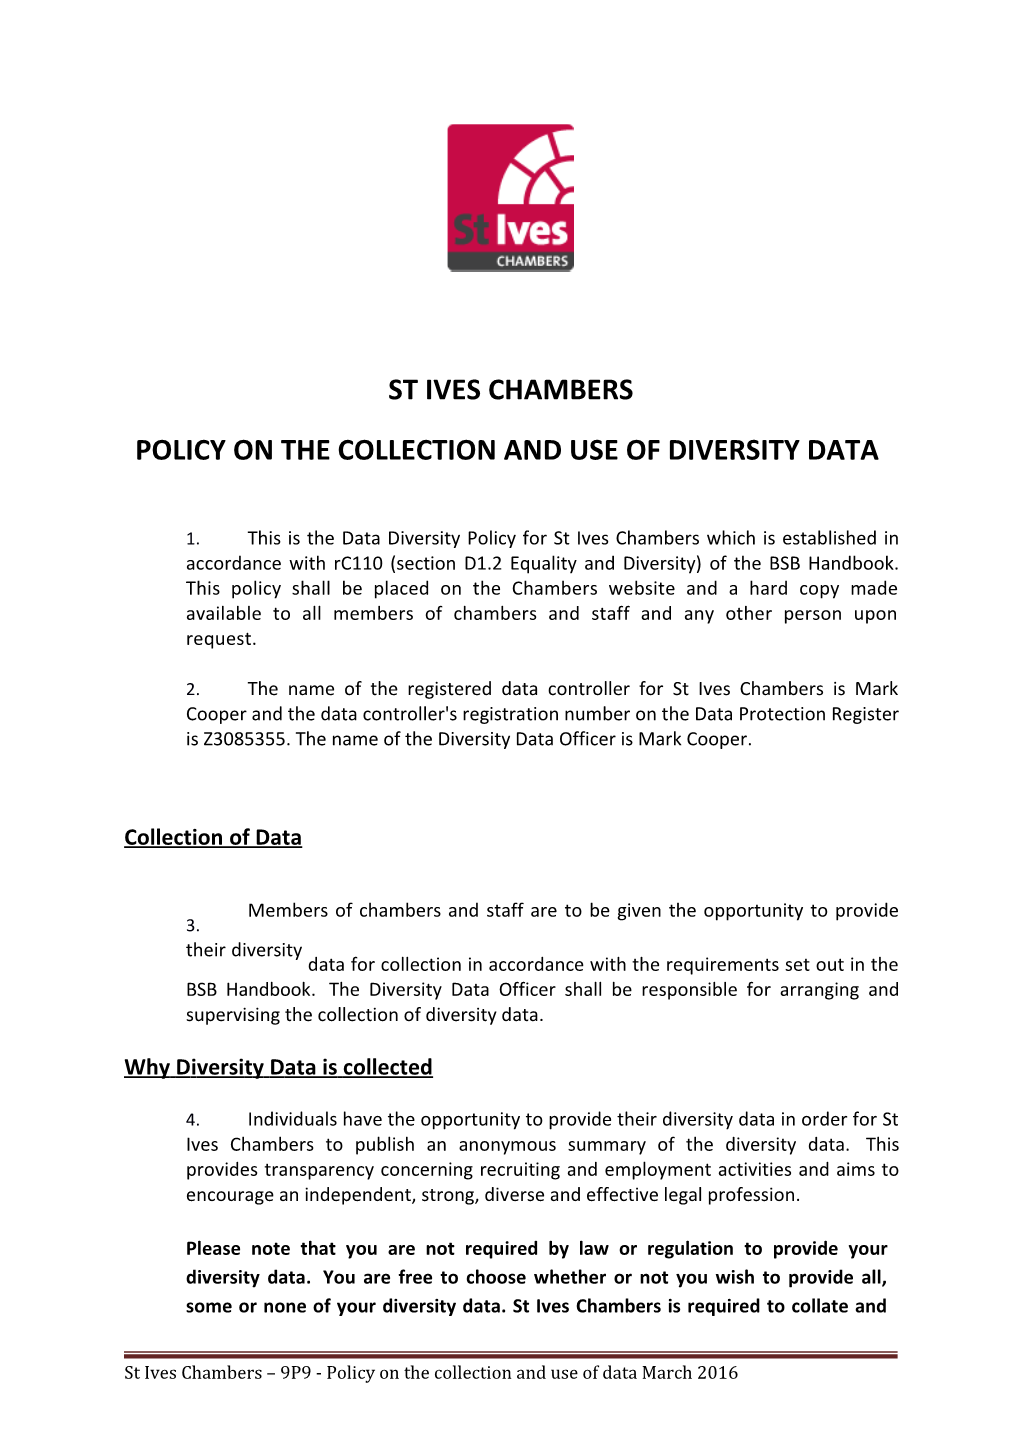 Policy on the Collection and Use of Diversity Data